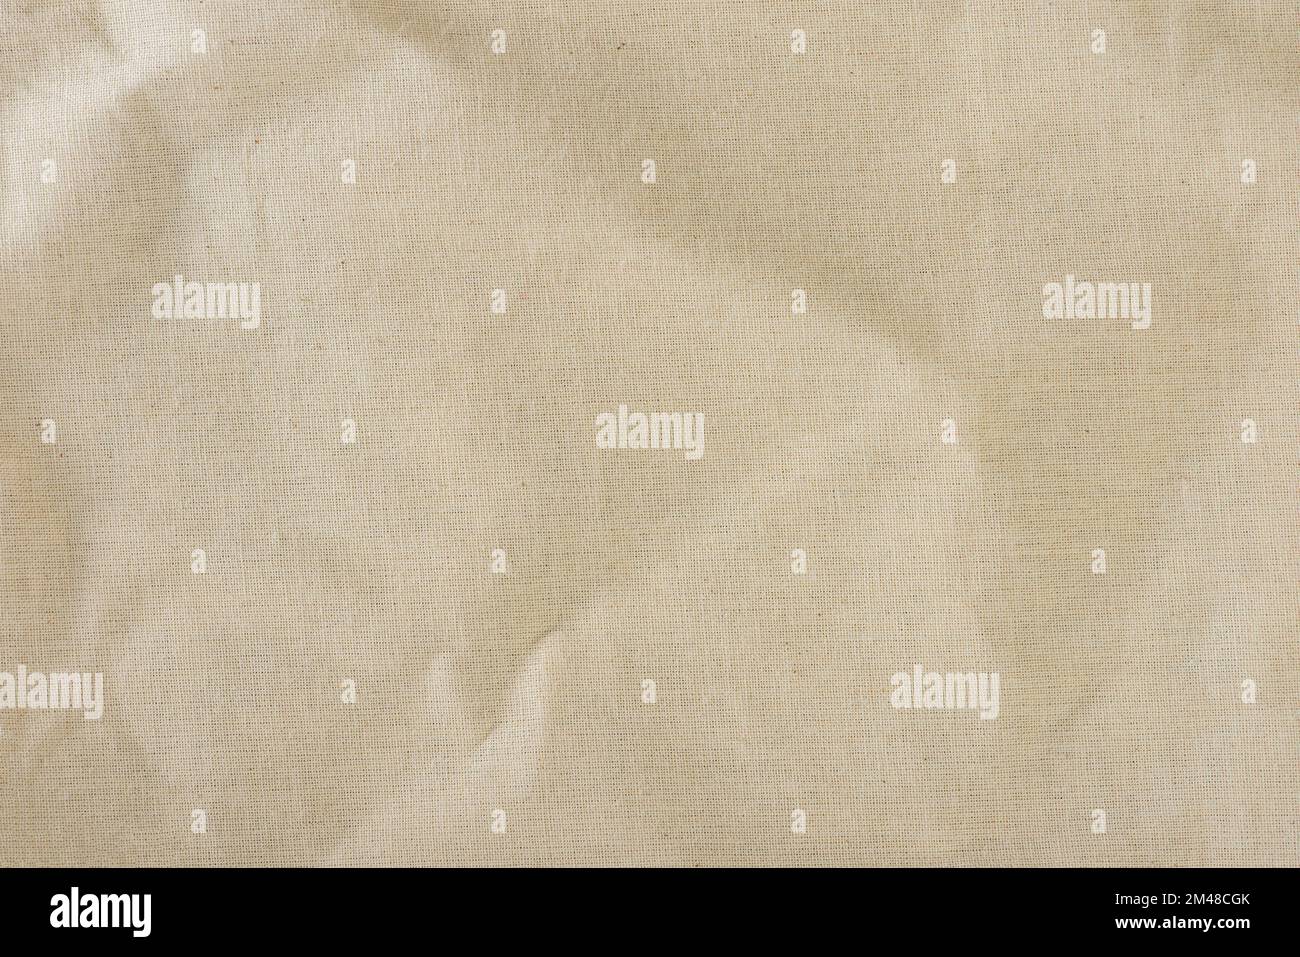 Texture of linen fabric in natural yellow color. The surface of the linen fabric as a background or banner, close-up. Stock Photo